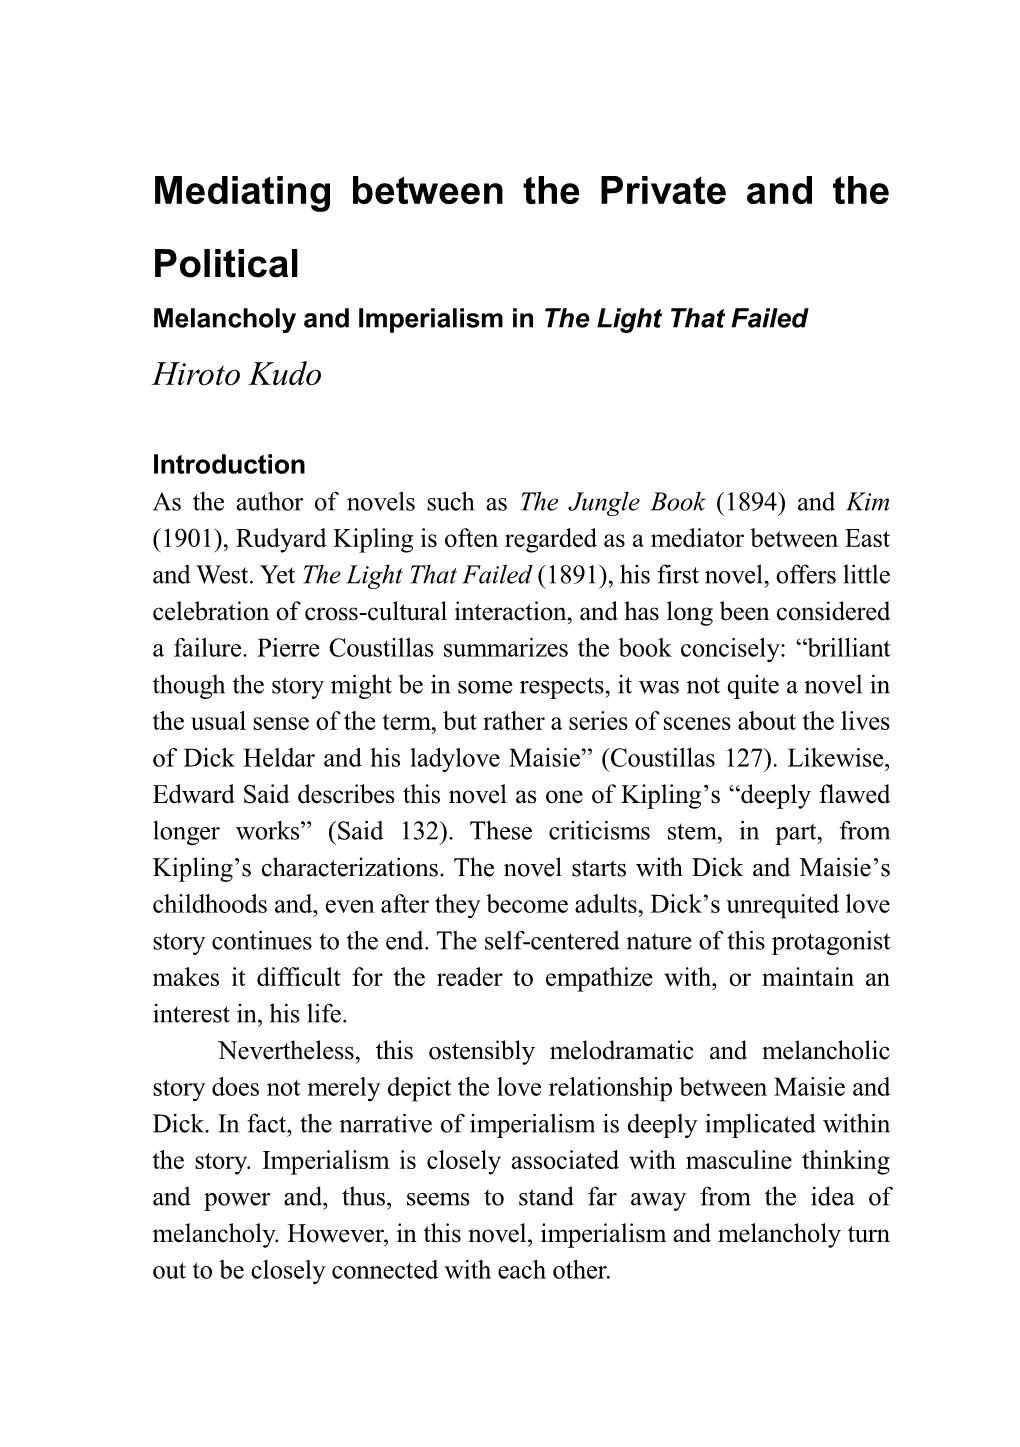 Mediating Between the Private and the Political Melancholy and Imperialism in the Light That Failed Hiroto Kudo